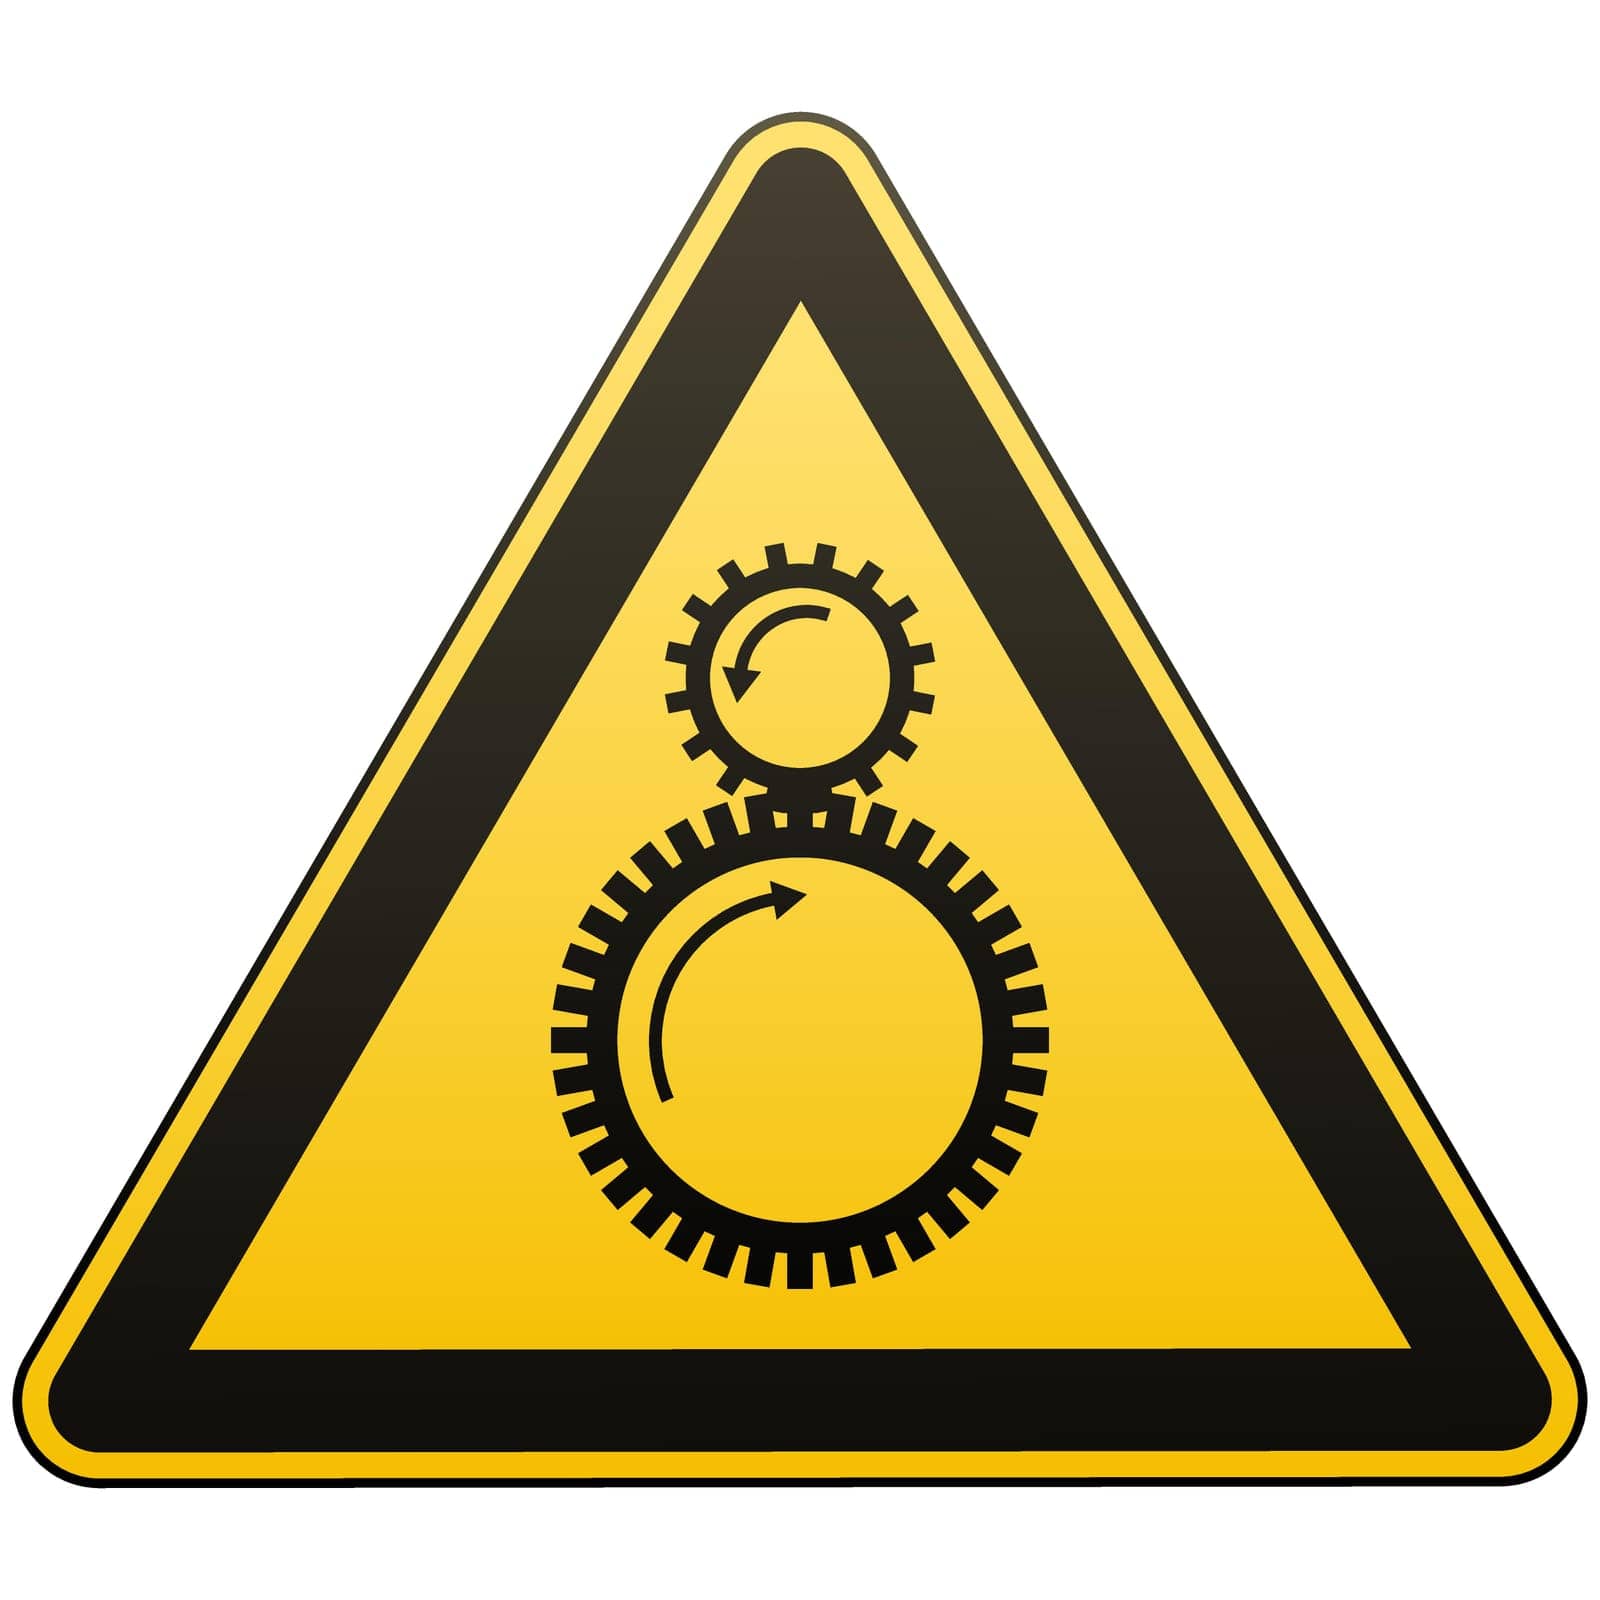 Carefully tightening between rotating elements is possible. Attention is dangerous. Warning sign. Safety precautions. Yellow triangle with black image. Isolated object on white background. Vector illustration